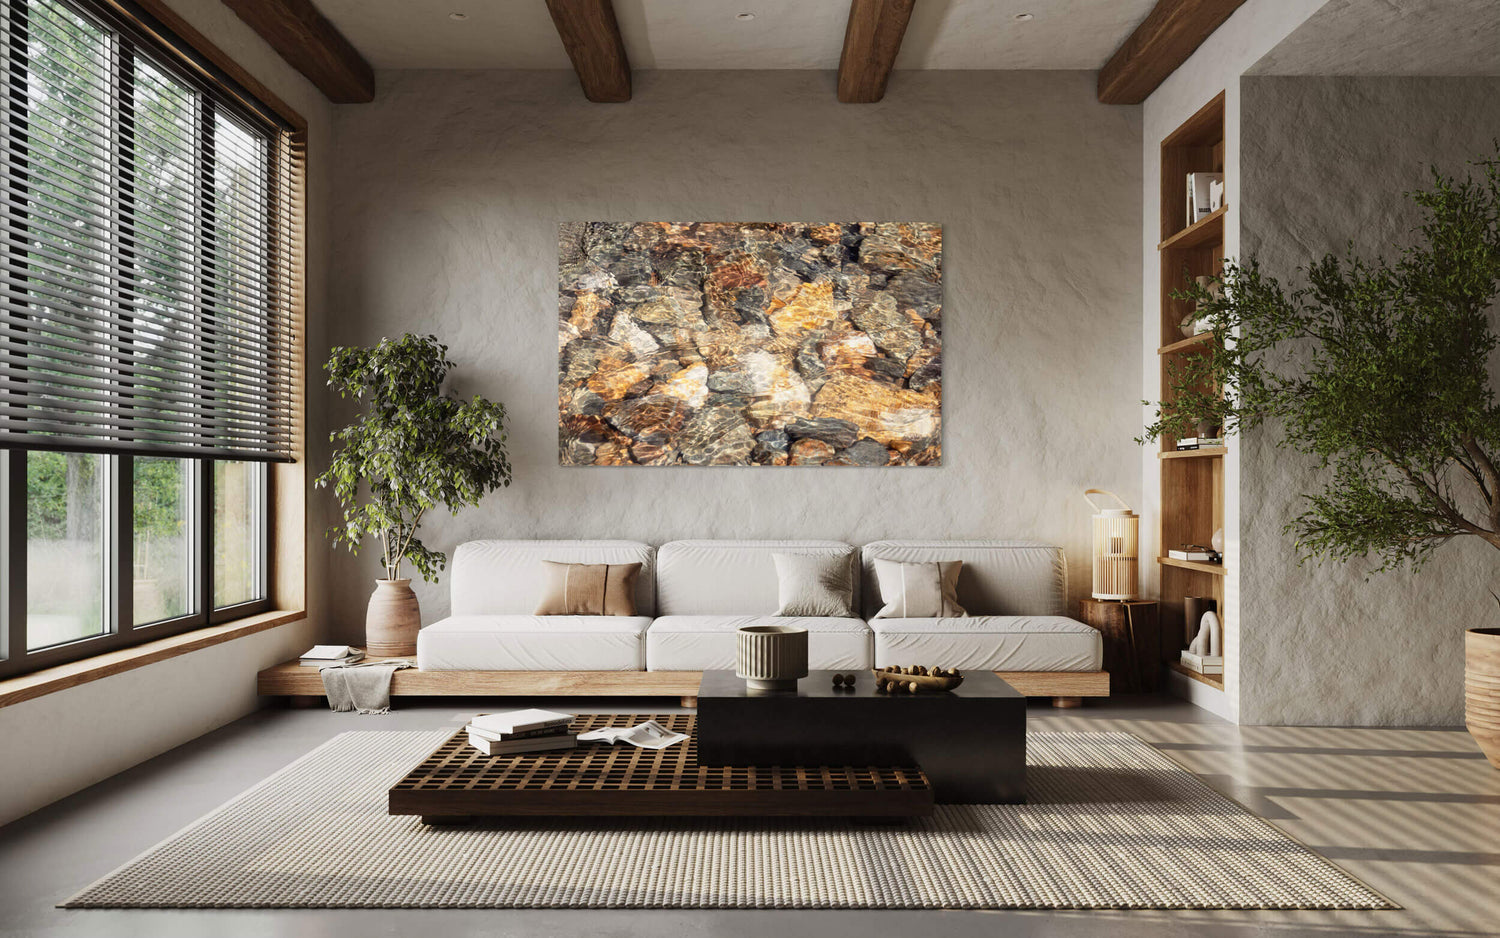 A piece of Telluride art showing glistening rocks in a Colorado River hangs in a living room.